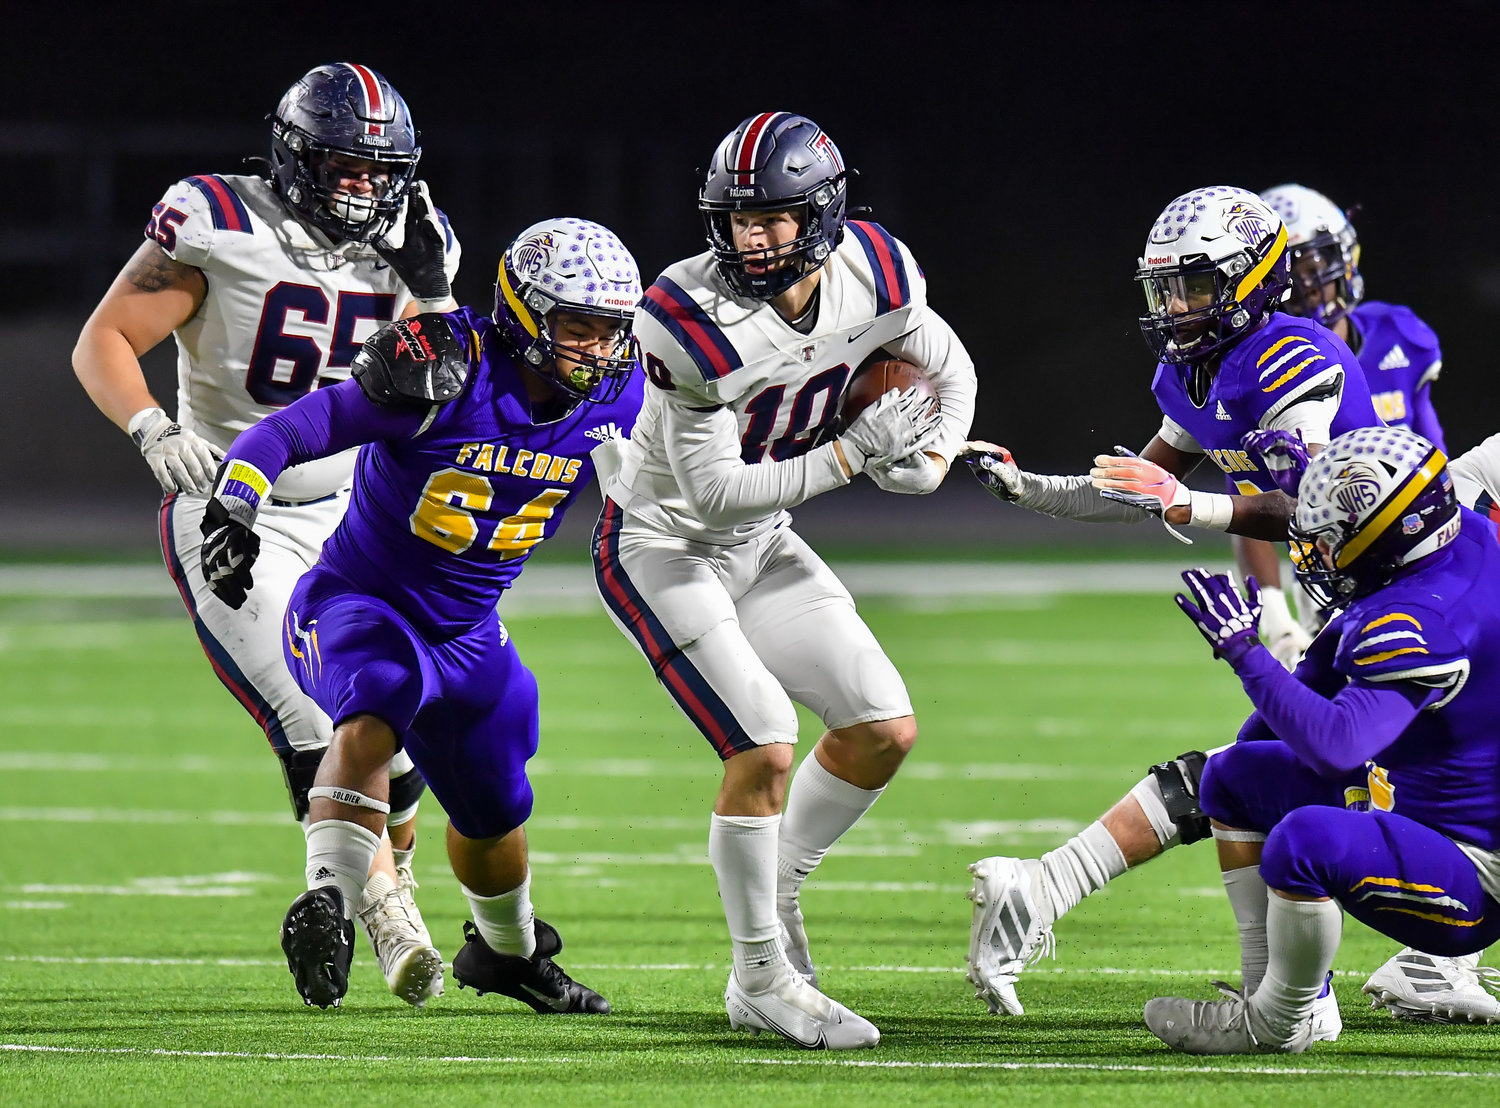 Houston Tx. Nov 19, 2021: Tompkins #10 Wyatt Young carries the ball during the UIL area playoff game between Tompkins and Jersey Village at Pridgeon Stadium in Houston. (Photo by Mark Goodman / Katy Times)